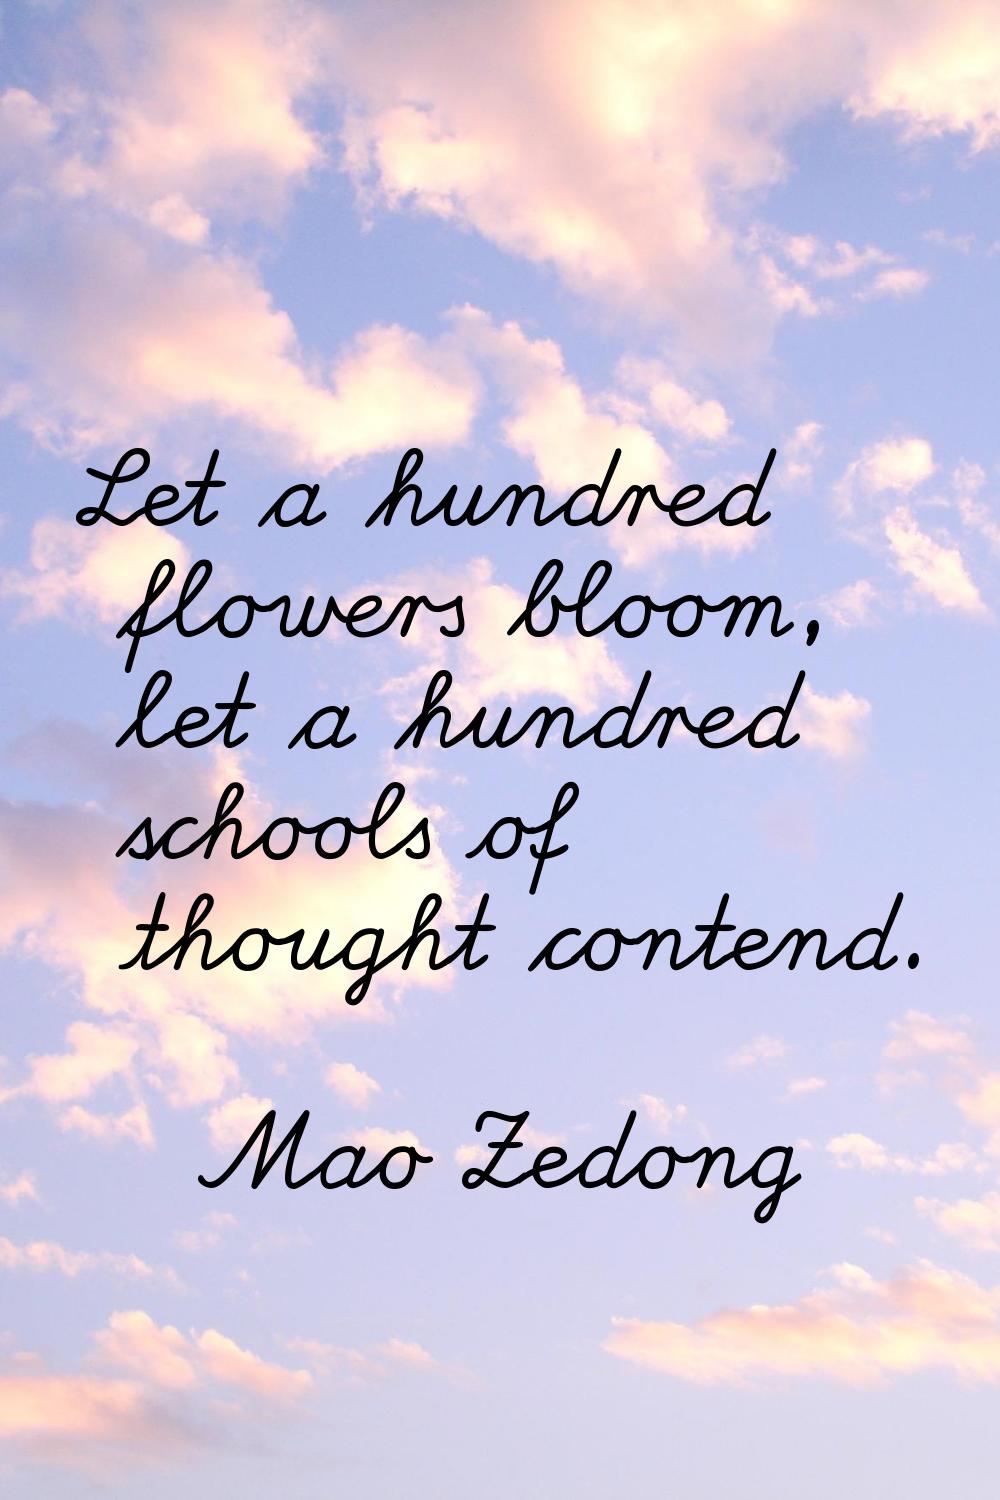 Let a hundred flowers bloom, let a hundred schools of thought contend.